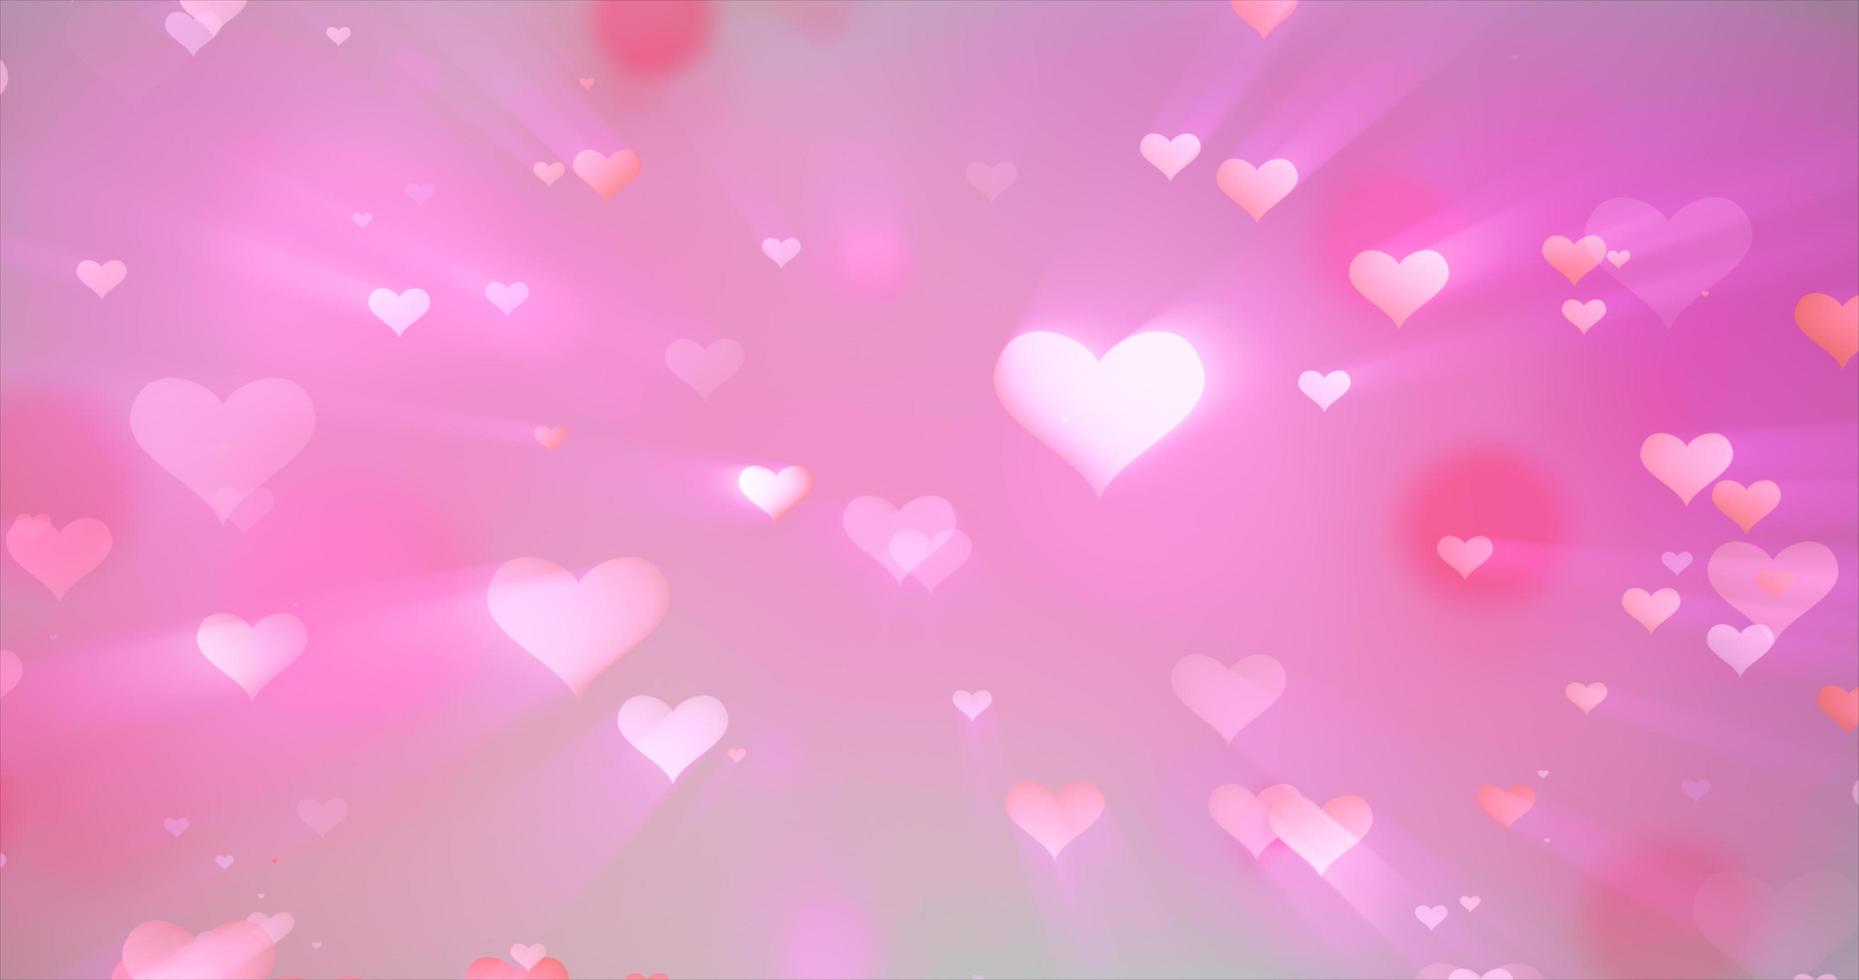 Glowing tender flying love hearts on a pink background for Valentine's Day photo